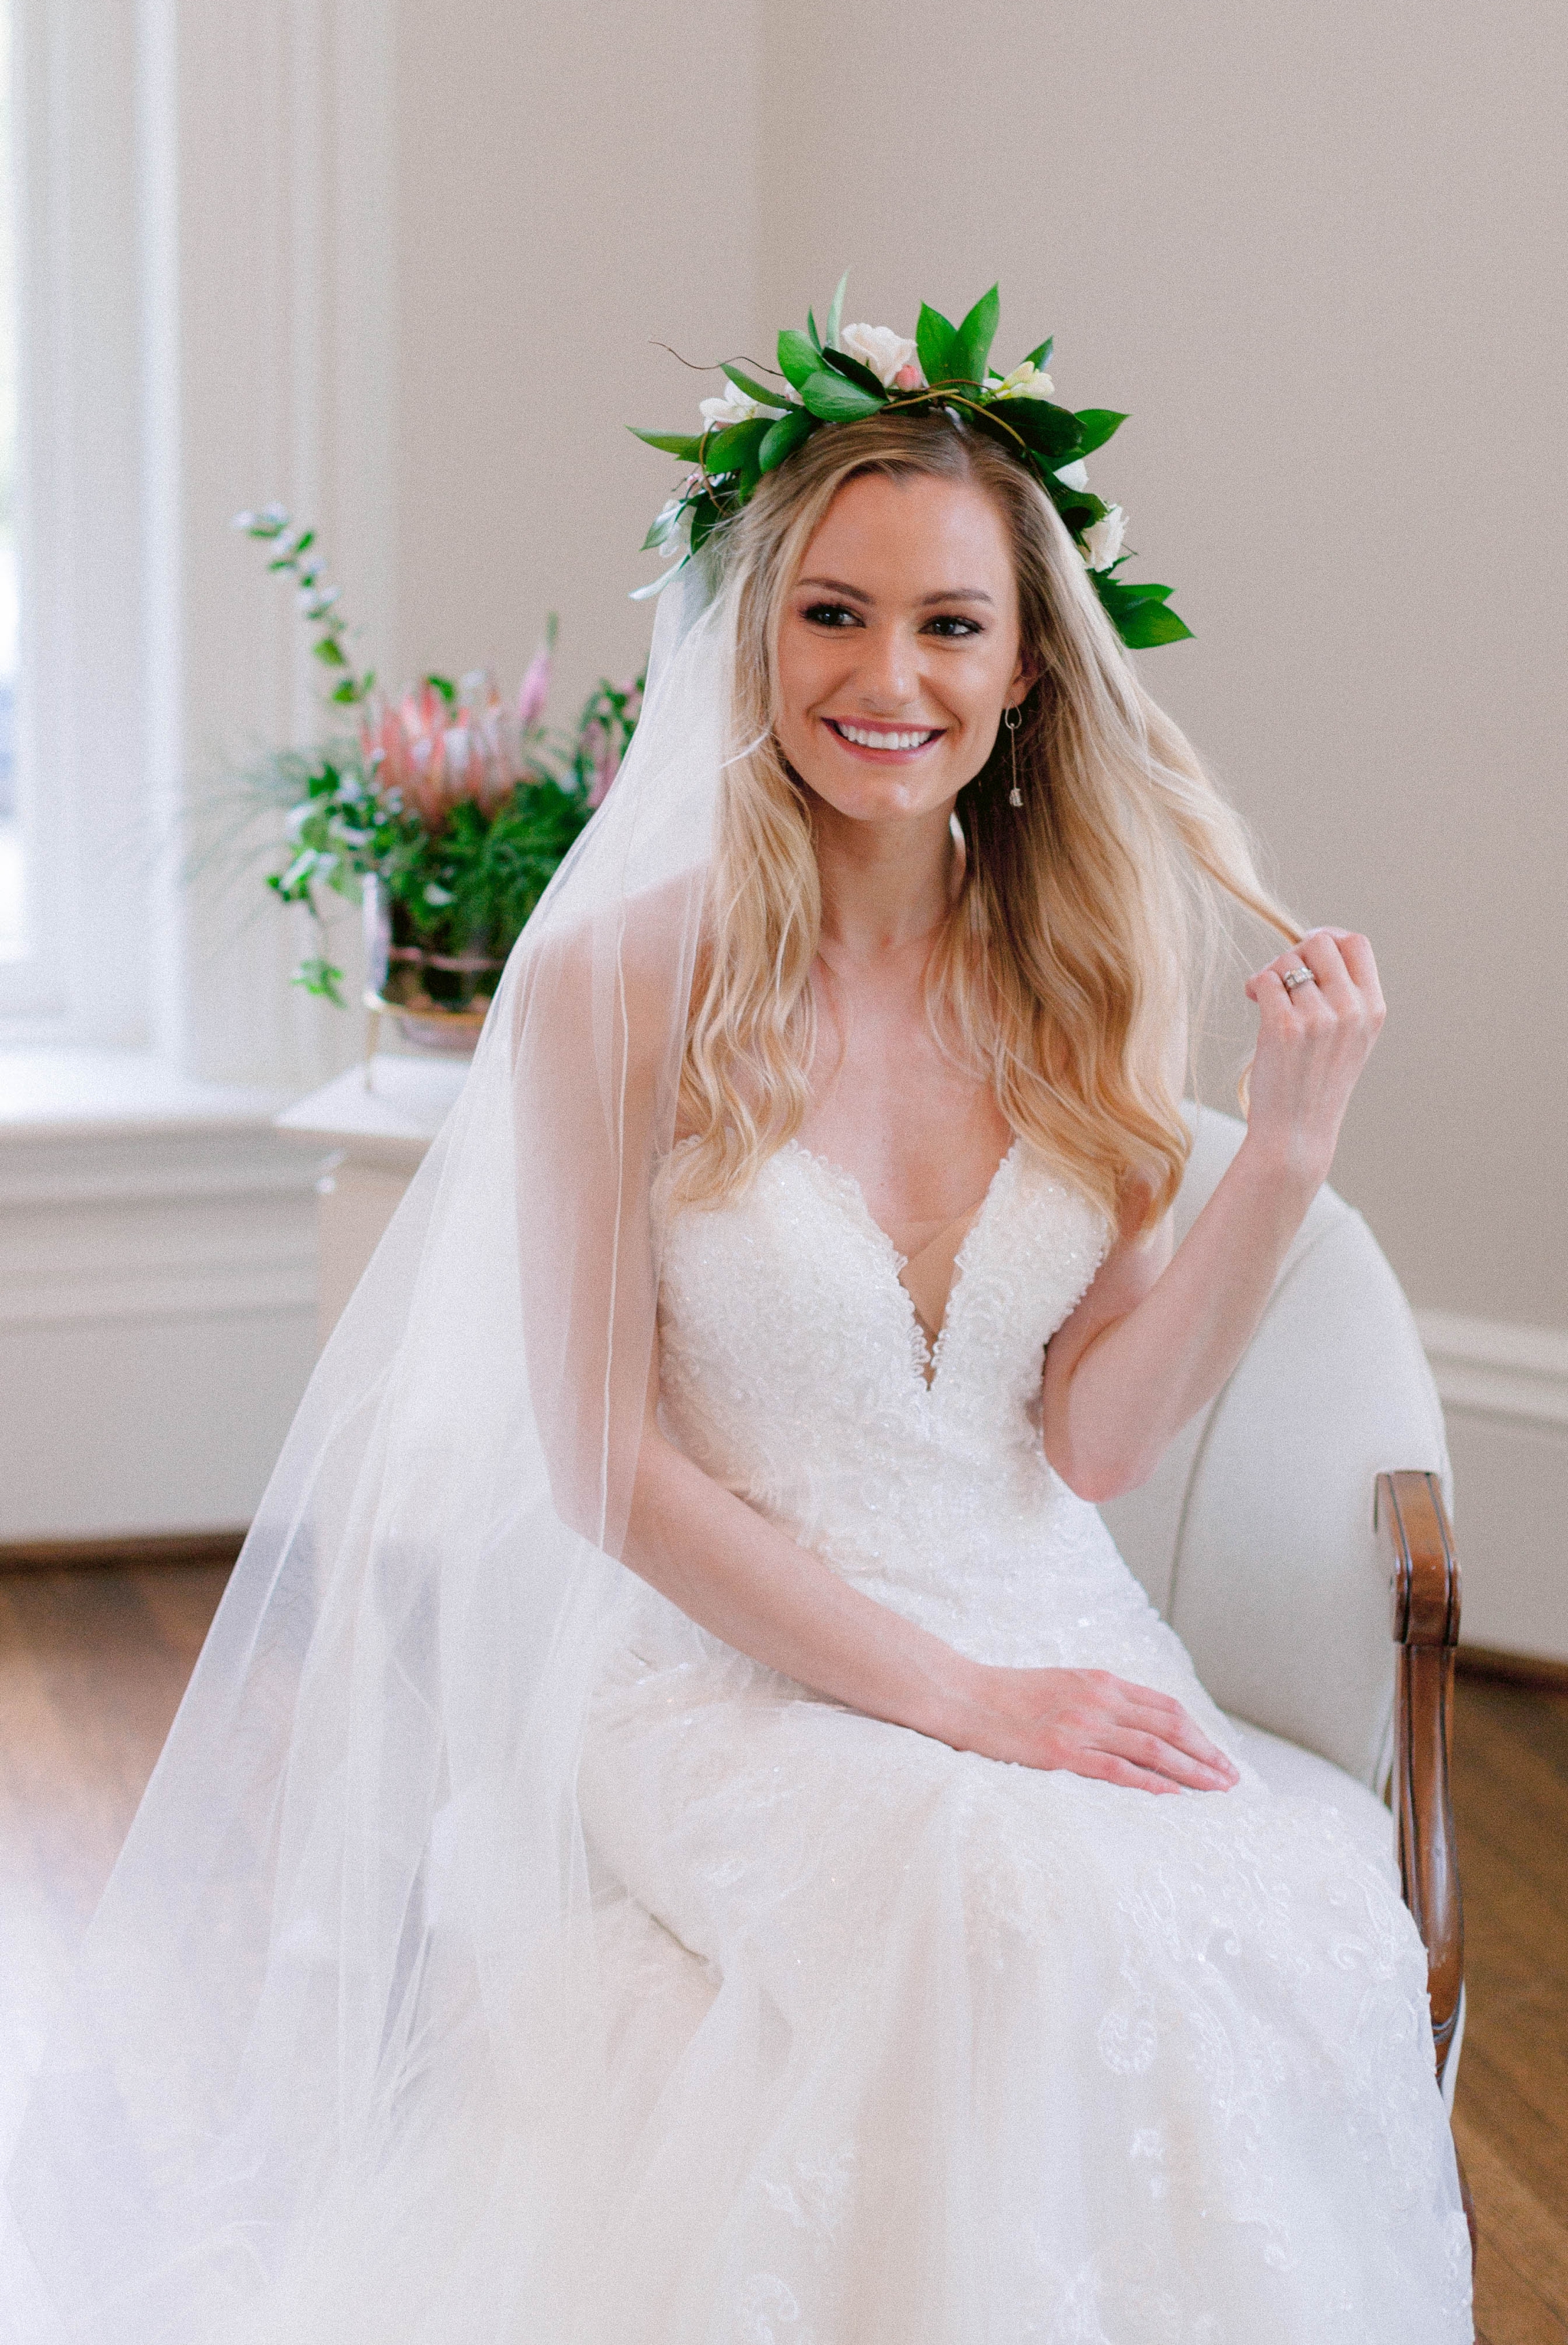  Indoor Bride + bridesmaids portraits in an all white room at a luxury estate with natural light before the ceremony - Bride is wearing a Hawaiian Flower Crown and a cathedral veil in a Wedding Gown by Stella York - Honolulu Oahu Hawaii Wedding Photo